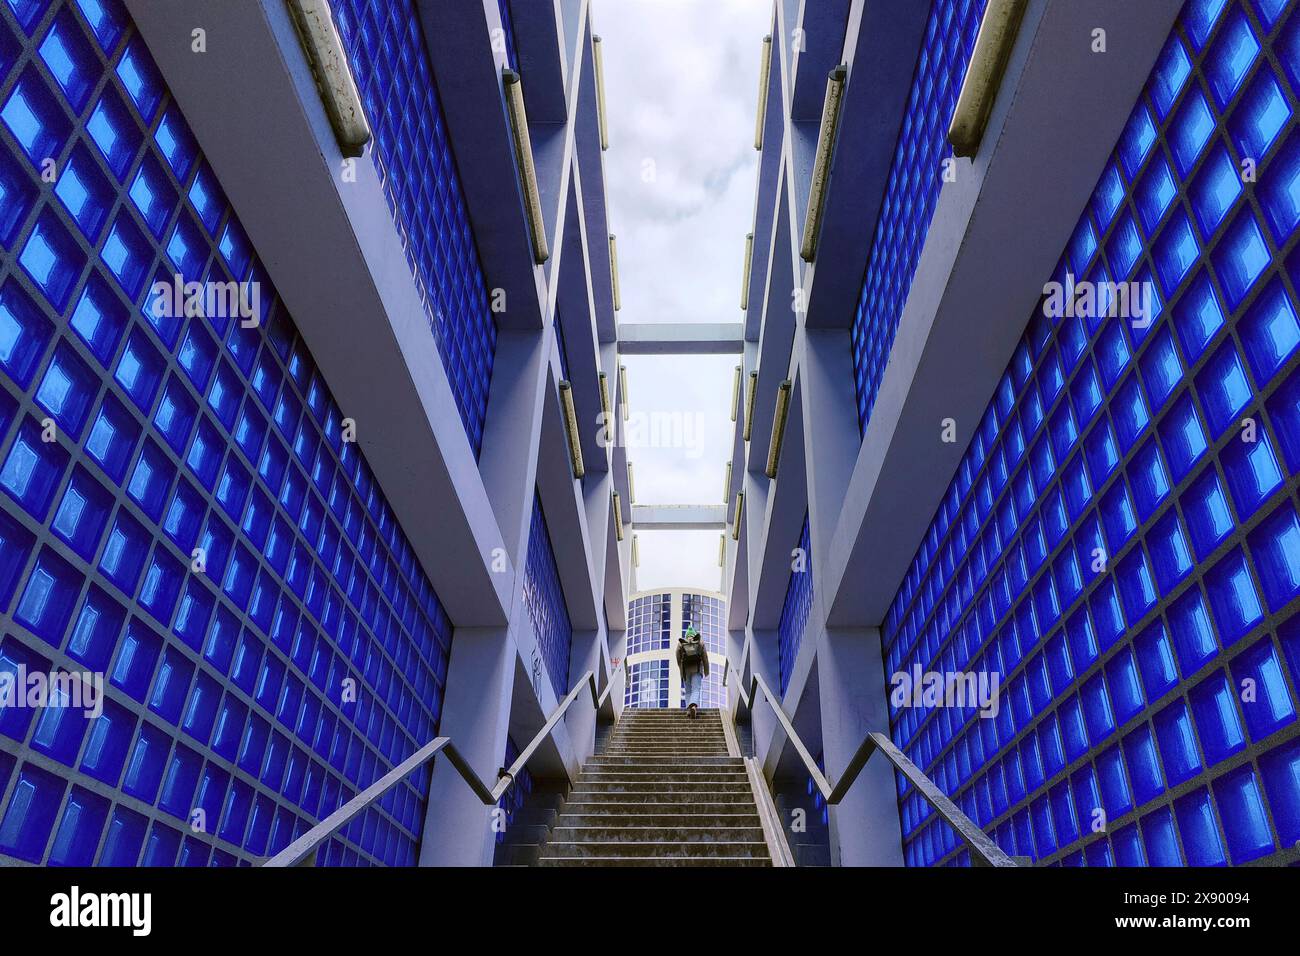 entrance to Hanover-Nordstadt railway station, blue glass blocks and exposed concrete, project for Expo 2000, Germany, Lower Saxony, Hanover Stock Photo